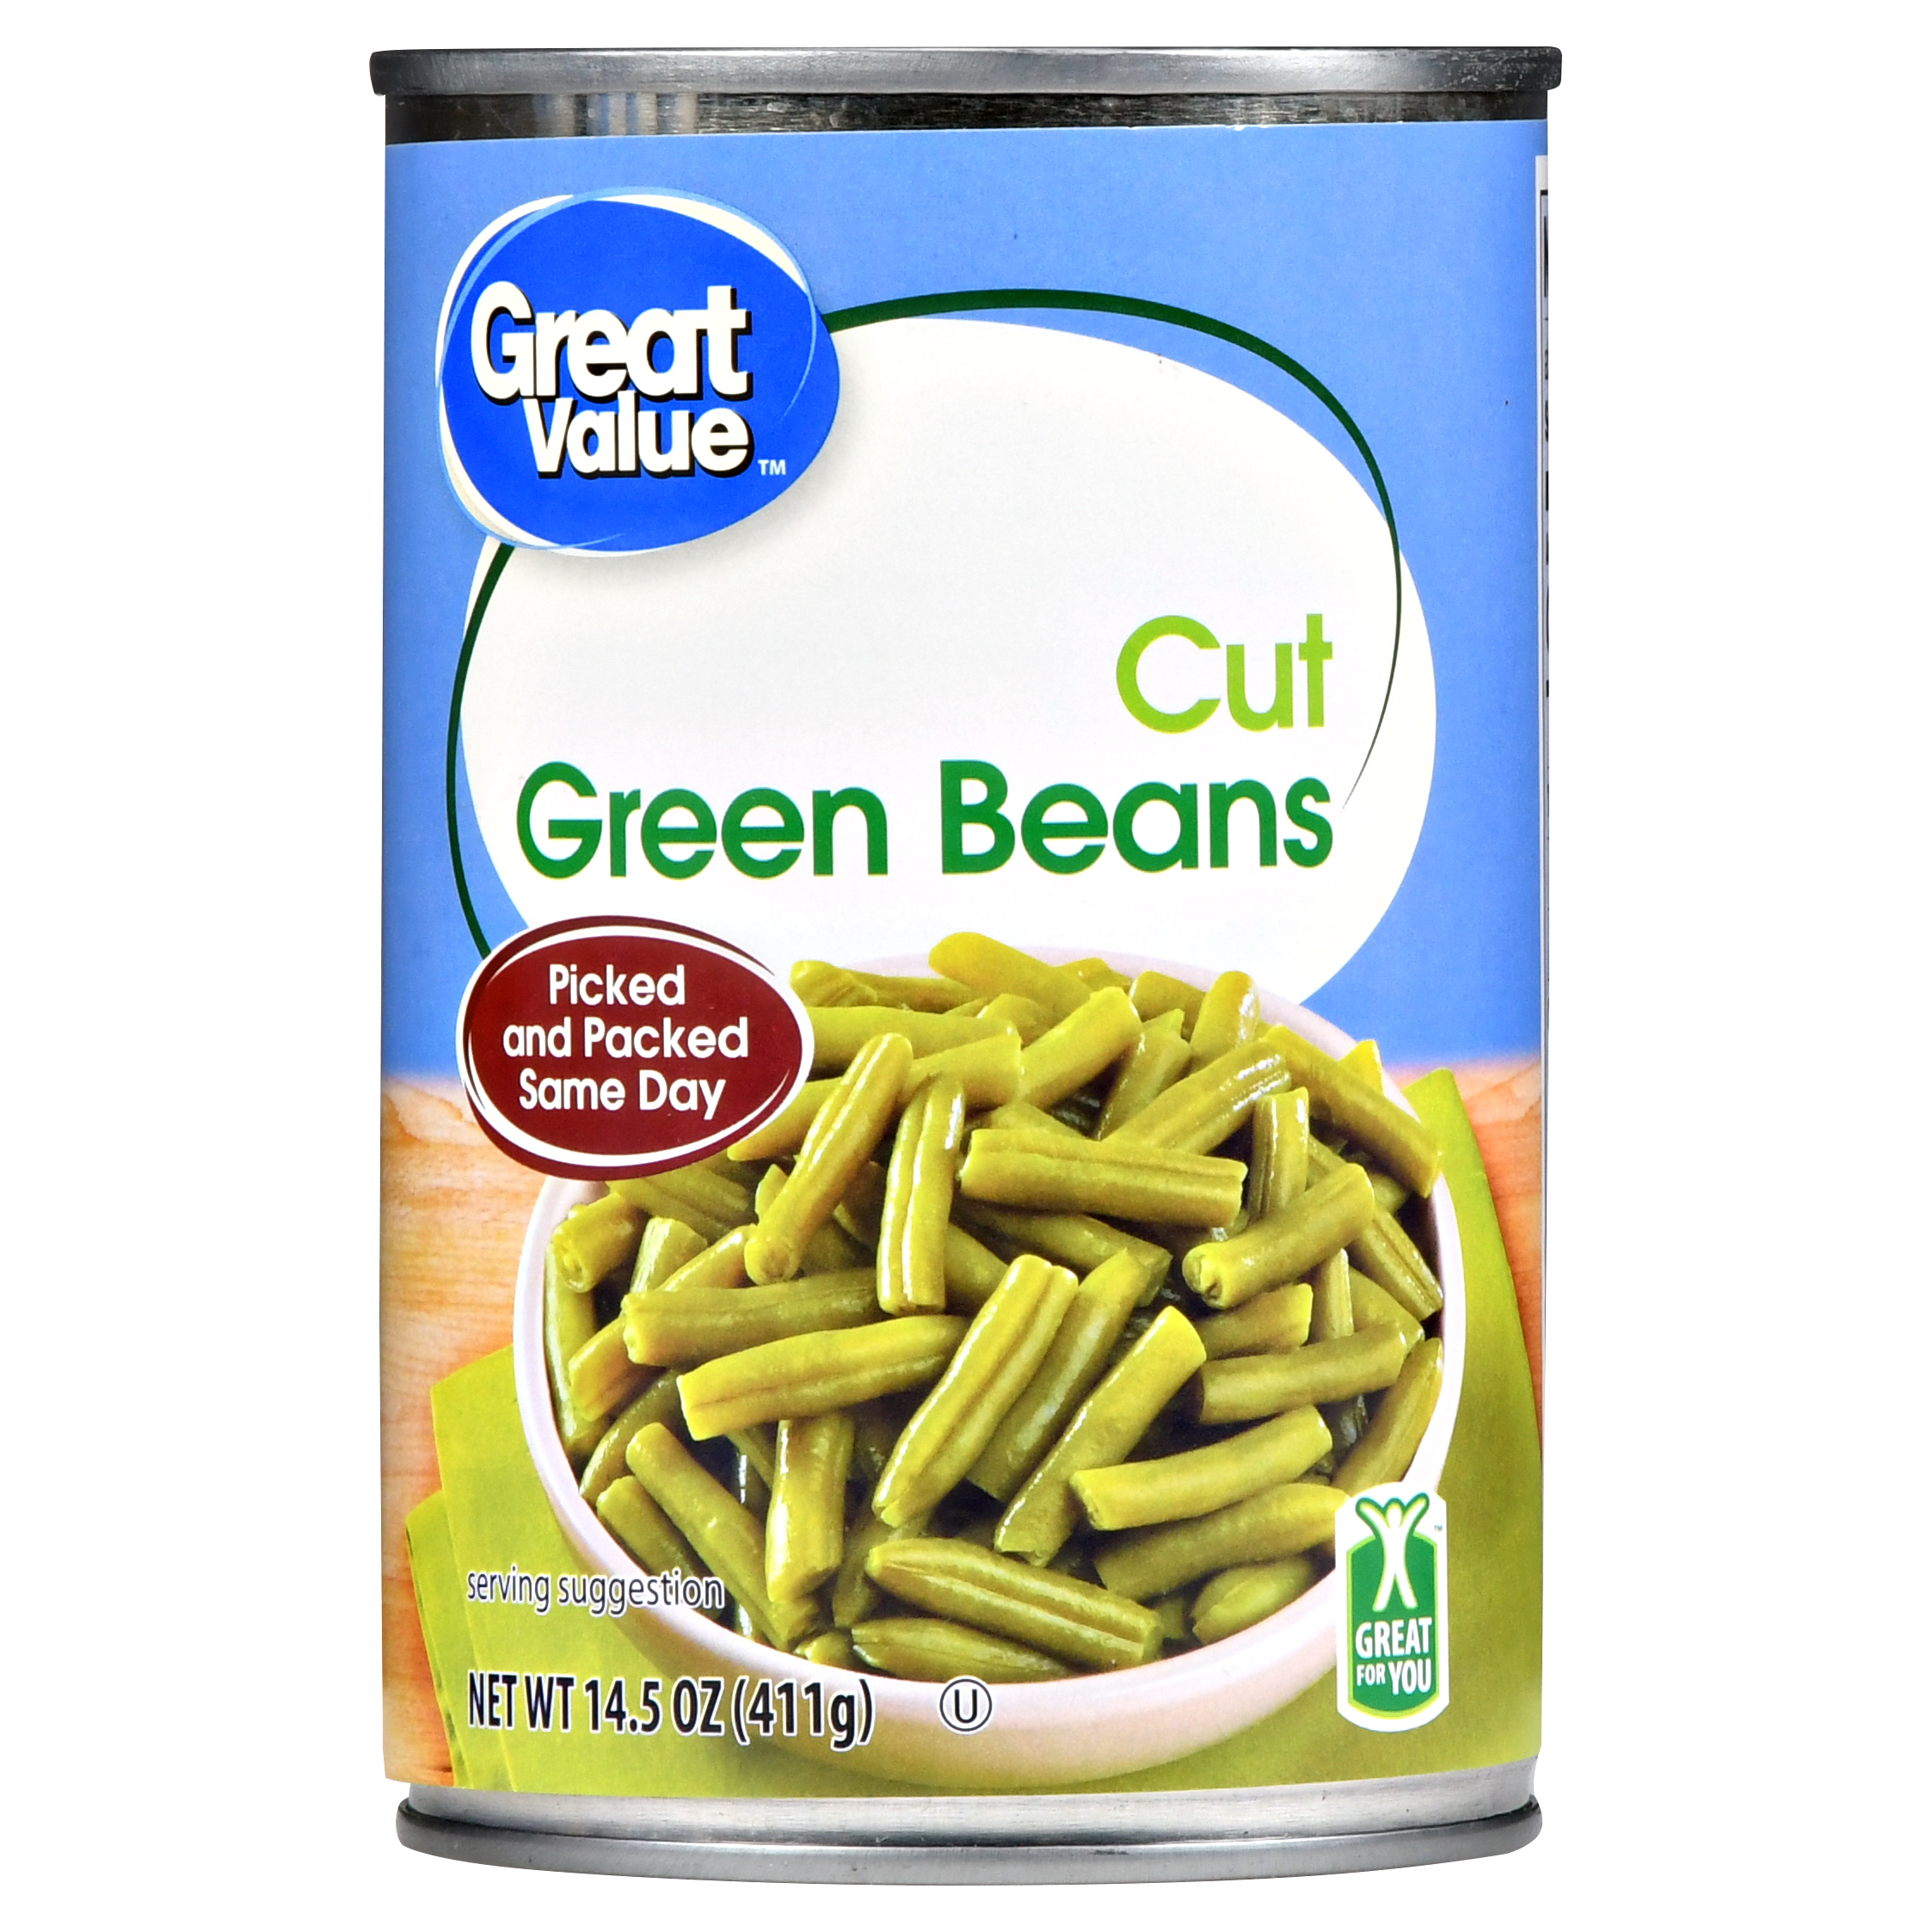 (4 Pack) Great Value Cut Green Beans, 14.5 Oz Image